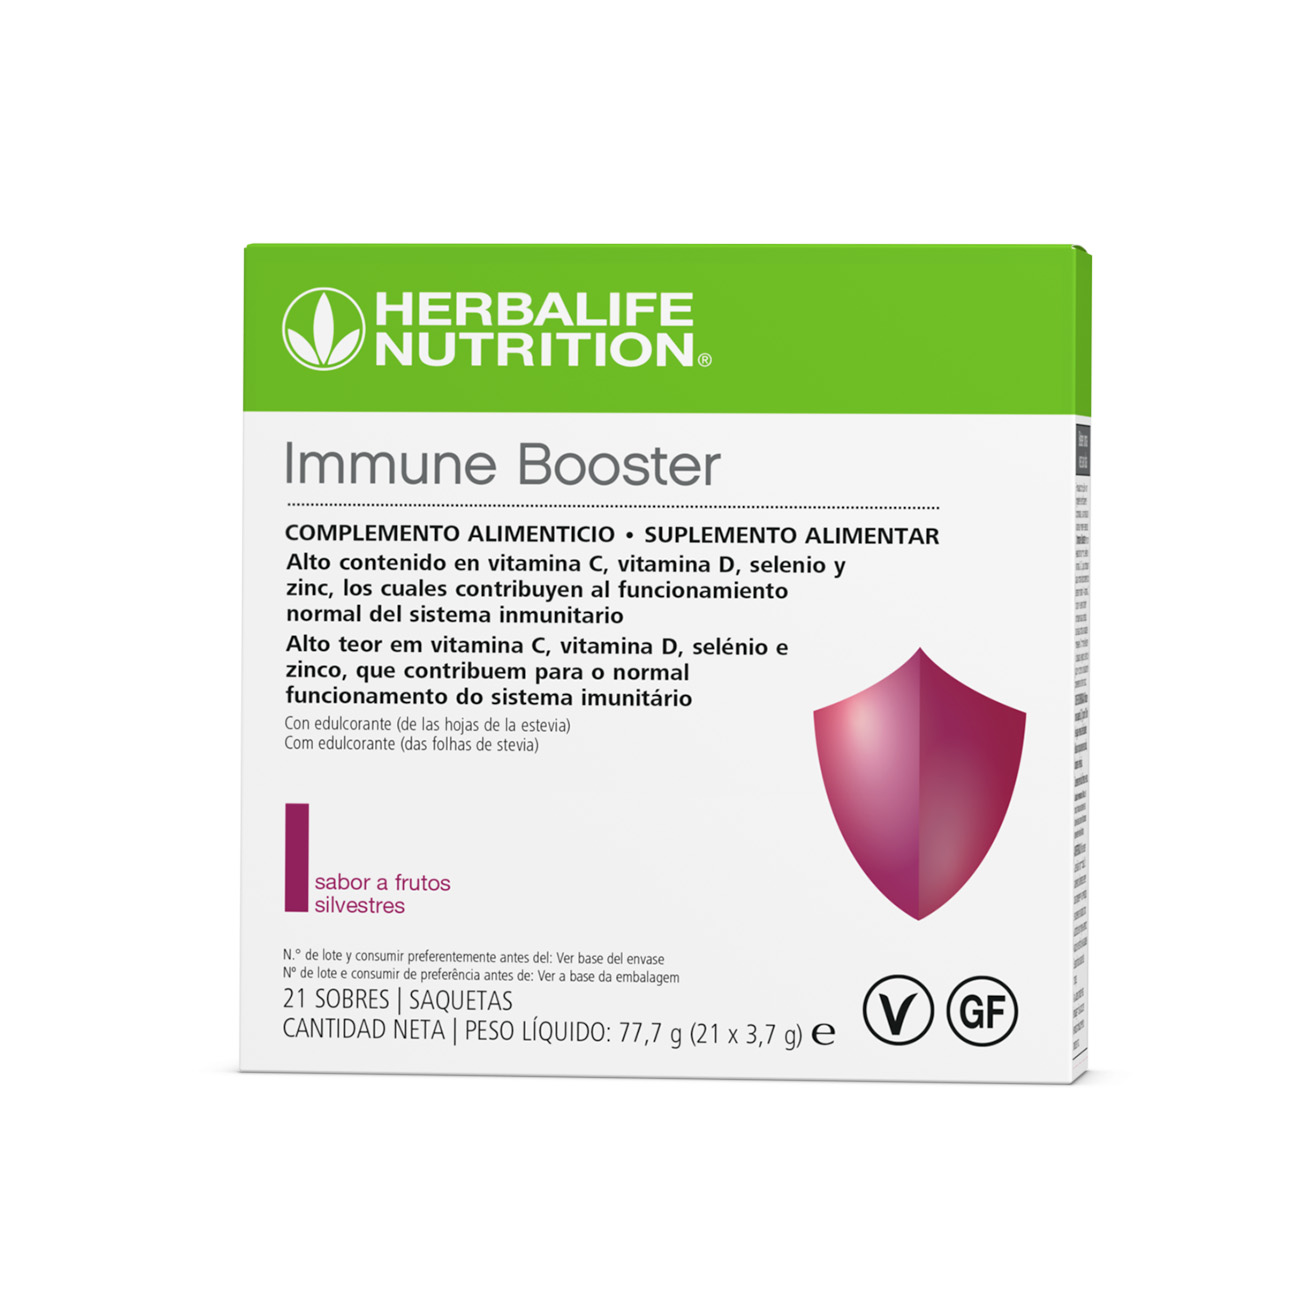 Formulated with EpiCor® and high in key vitamins and minerals, Immune Booster is a great way to take care of your immune system when you are on-the-go.